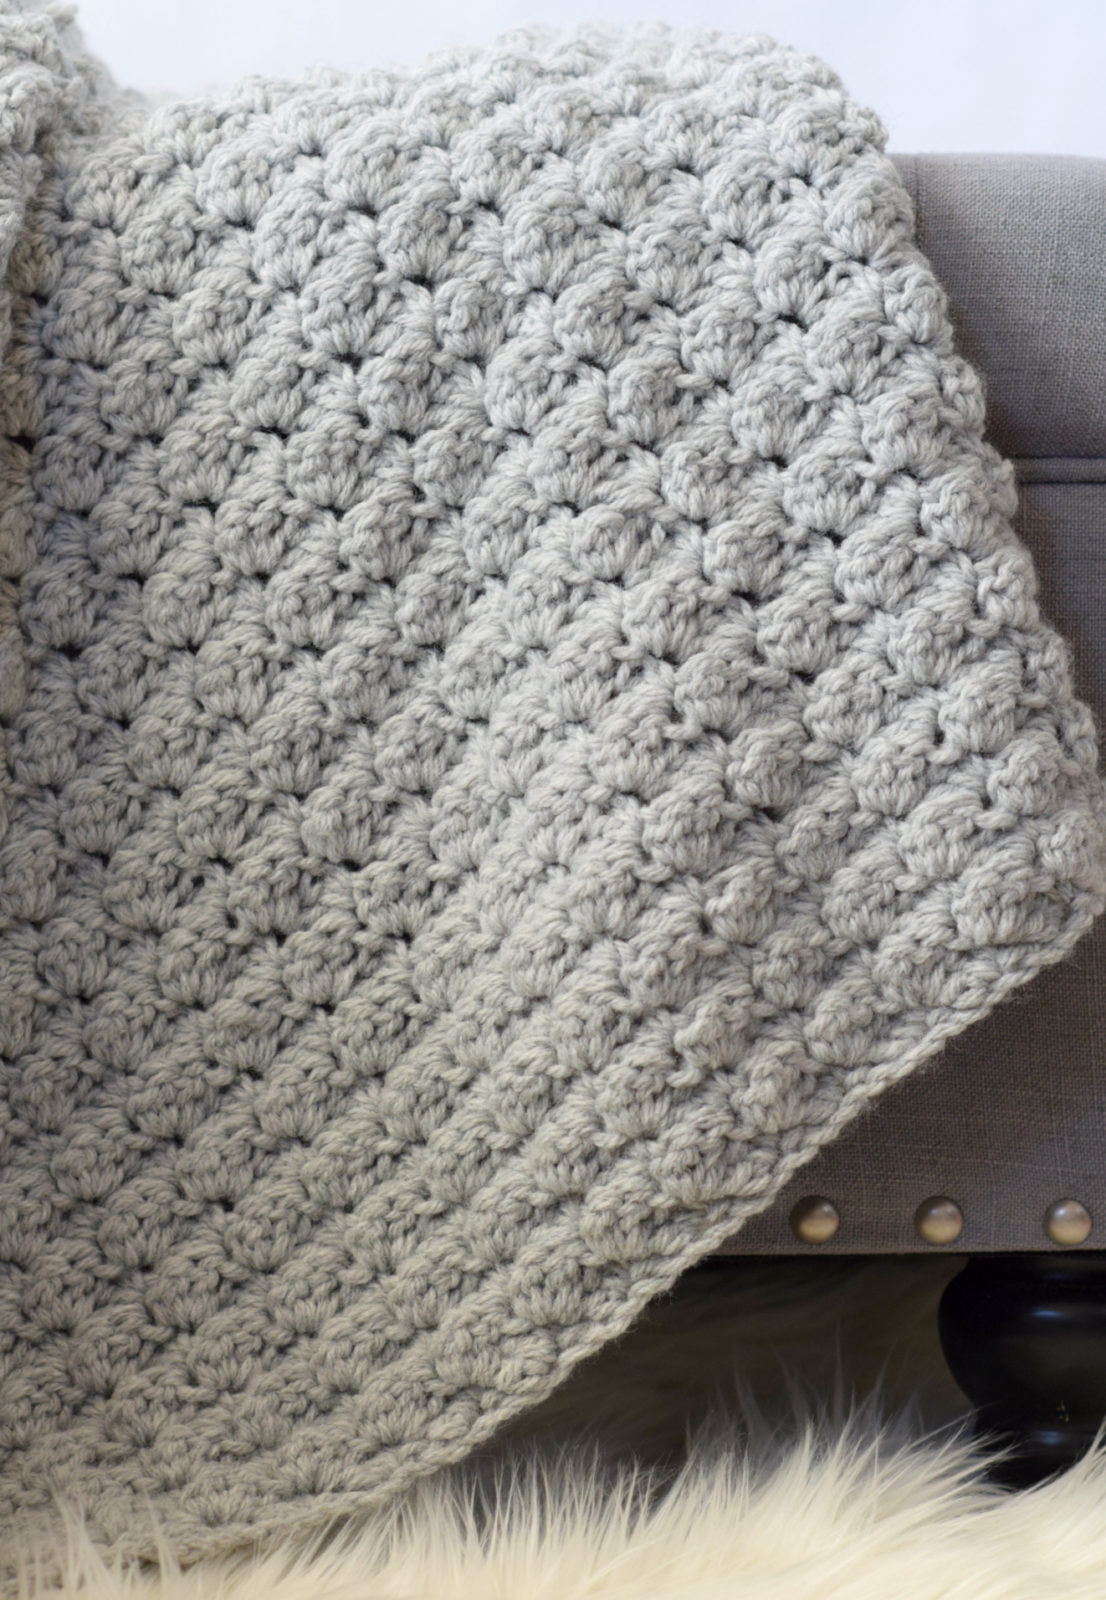 Simple Crochet Blanket Patterns Simple Crocheted Blanket Go To Pattern Mama In A Stitch